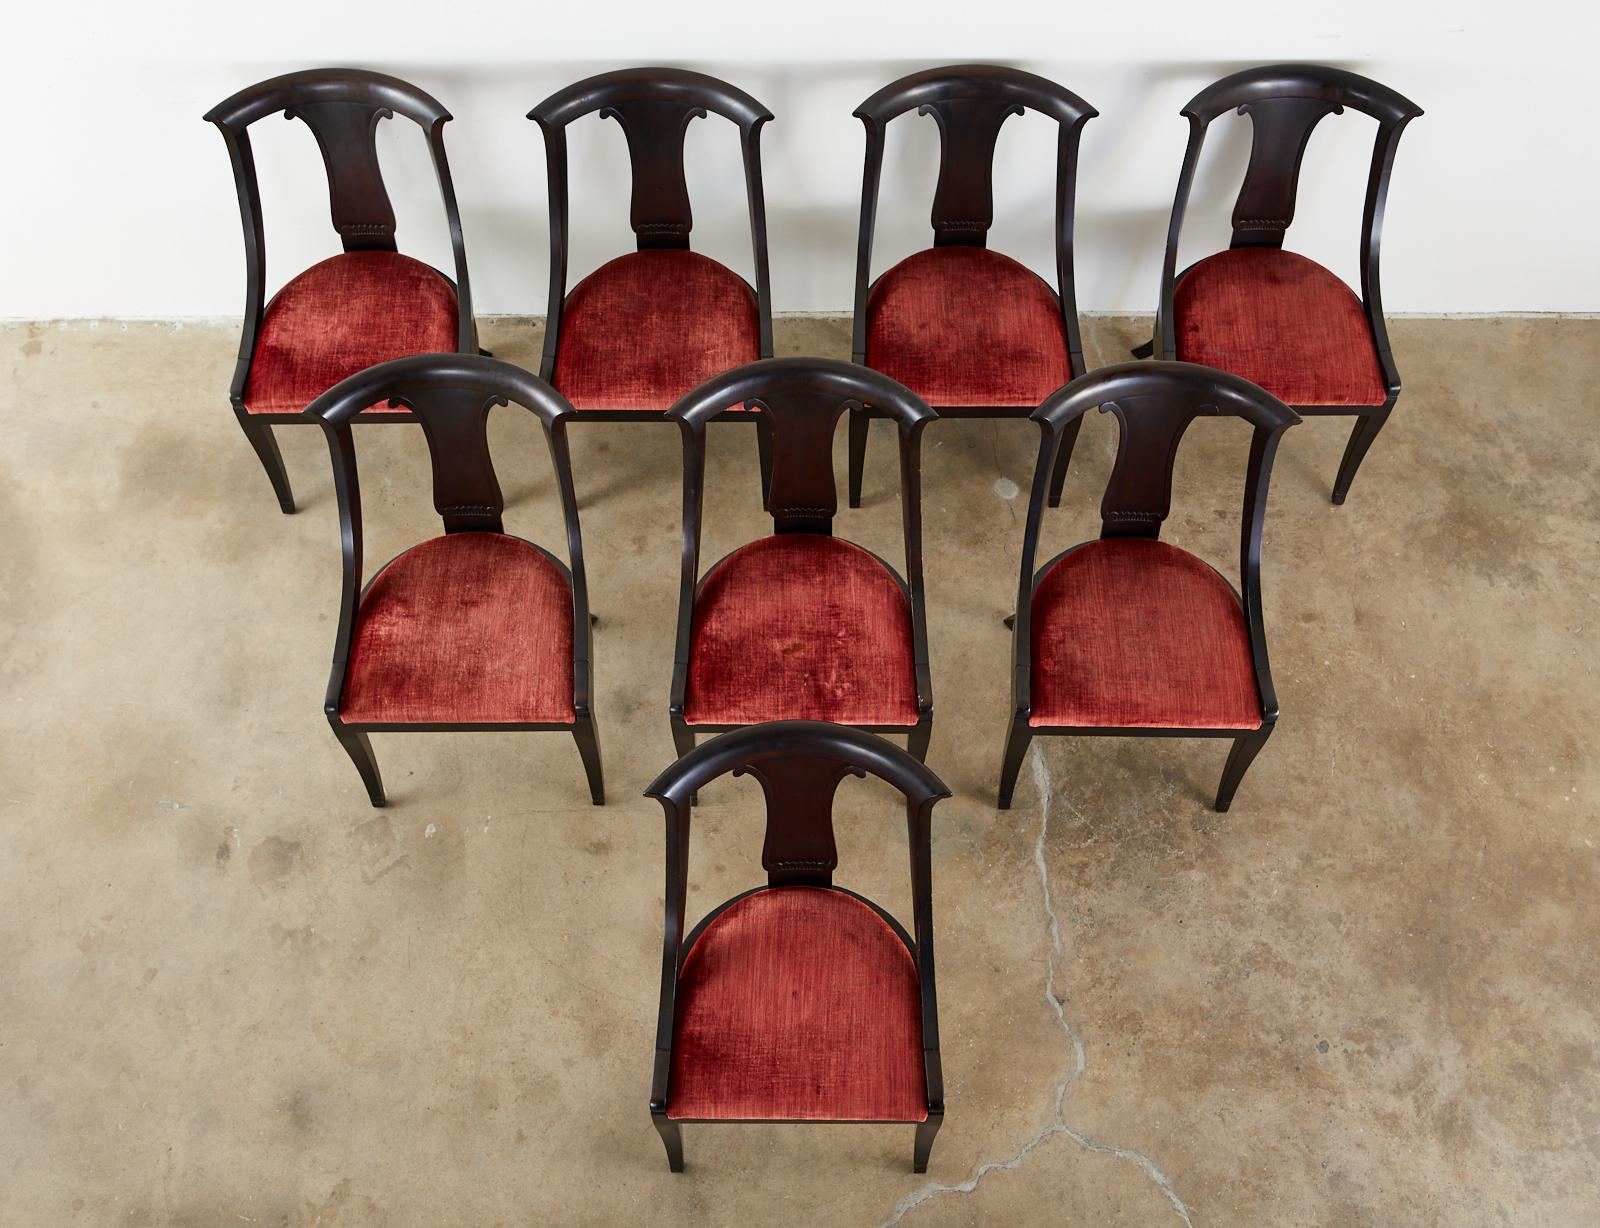 Extraordinary set of eight ebonized mahogany dining chairs featuring a tub or gondola form frame. Made in the neoclassical directoire French taste. Minimally decorated having a vasiform back splat surmounted by a curved crest rail. Gracefully curved